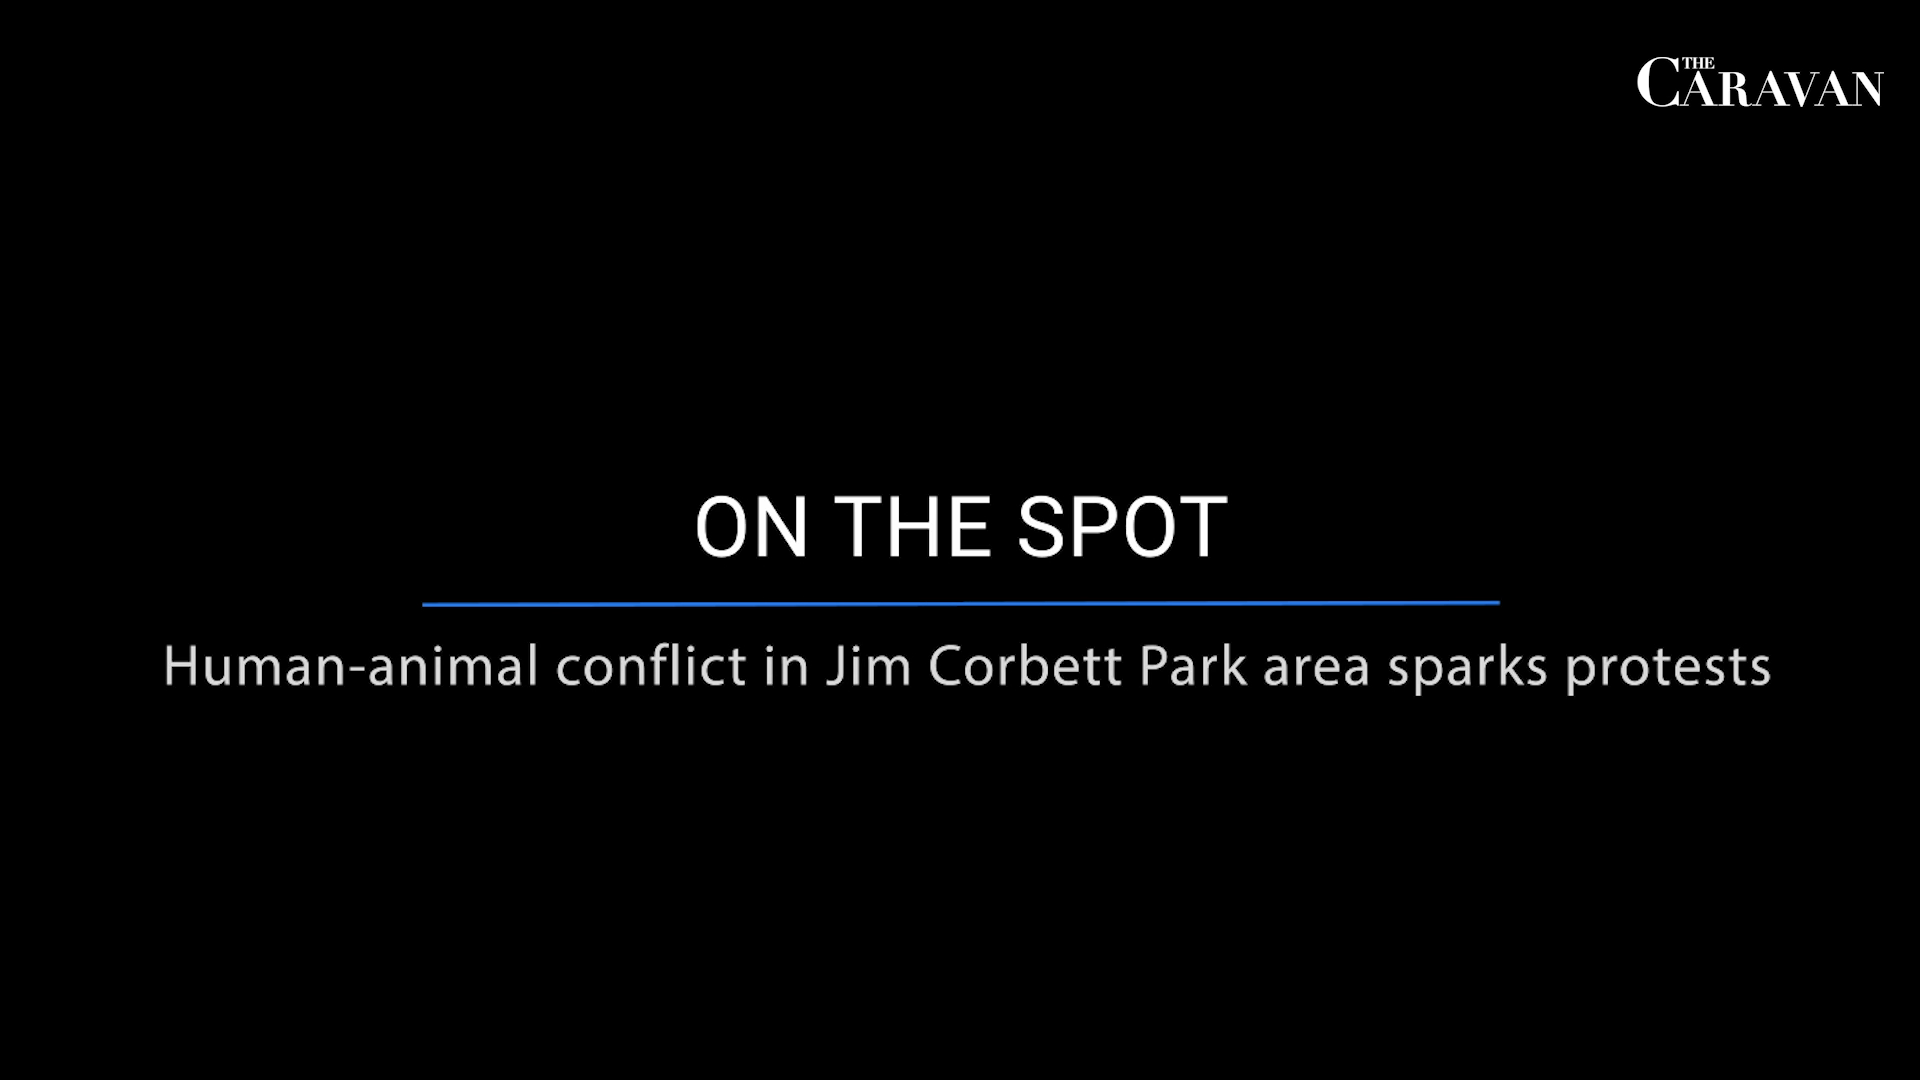 On the spot: Human-animal conflict in Jim Corbett Park area sparks protests